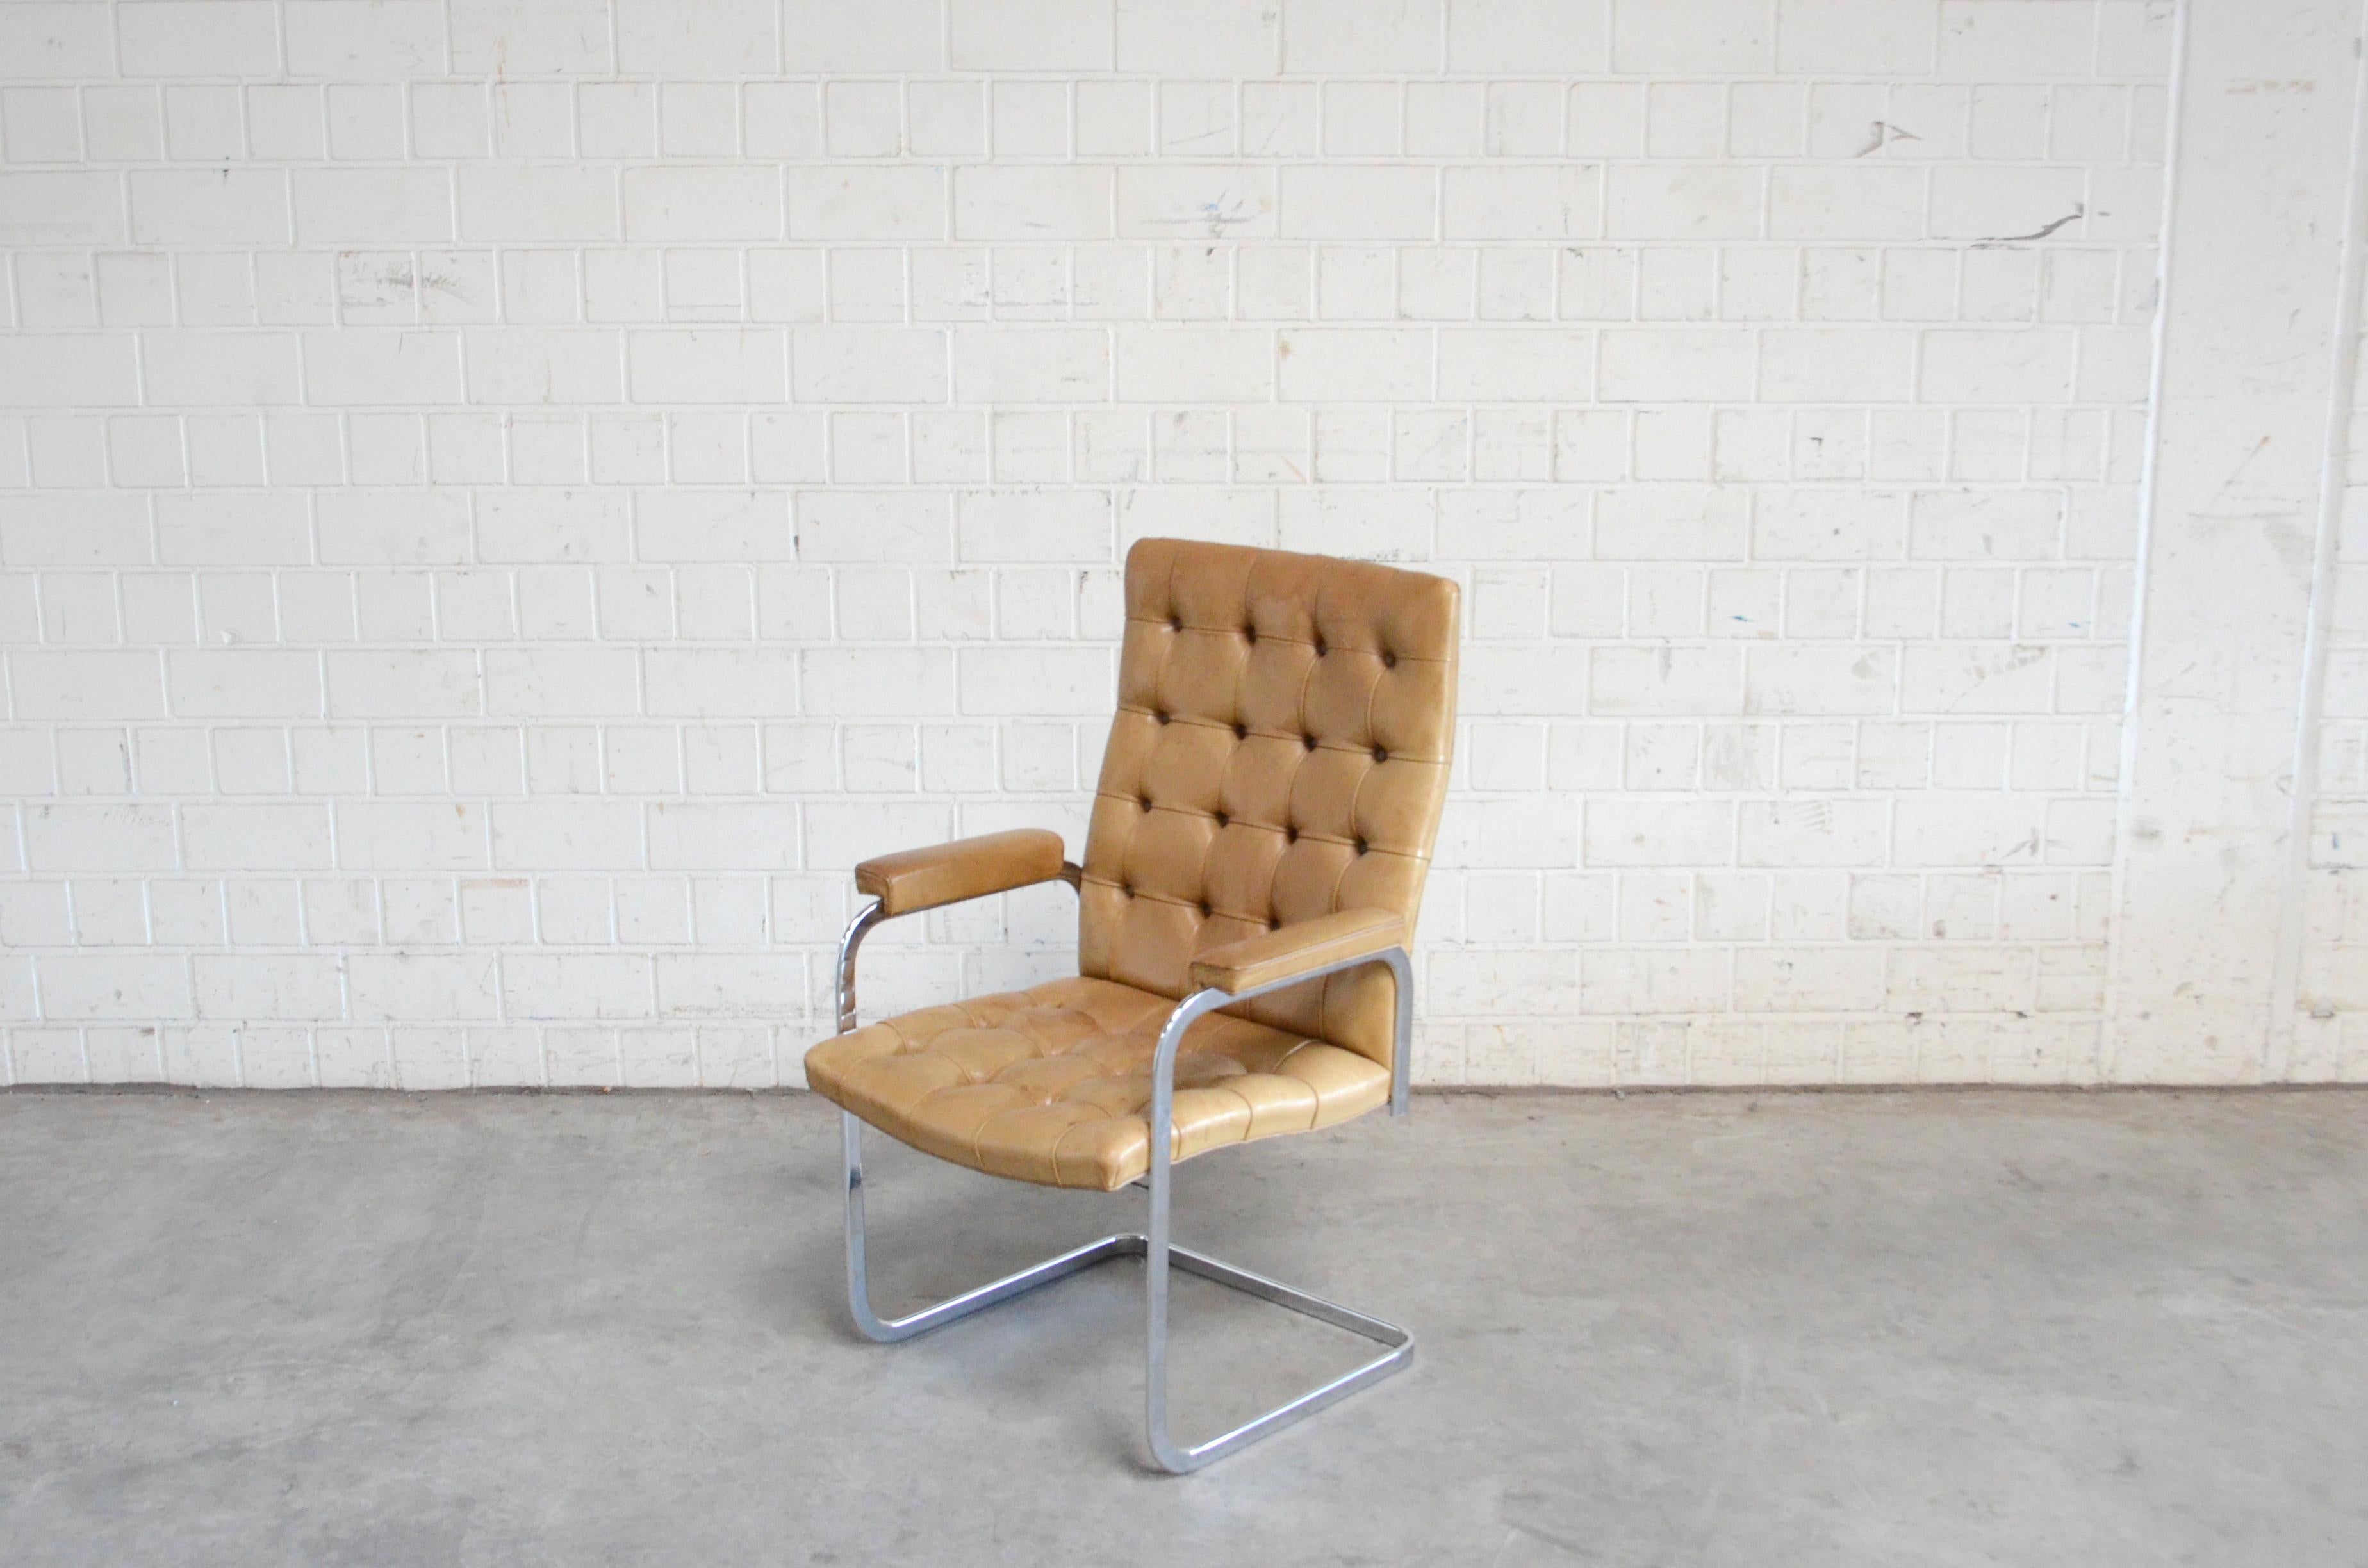 Robert Haussmann RH 305 armchair design of 1957 and manufactured by De Sede.
Cognac aniline leather an a chrome steel frame.
This is a Classic Swiss design chair in the tufted highback version.
With some patina on the leather.
Price for 1